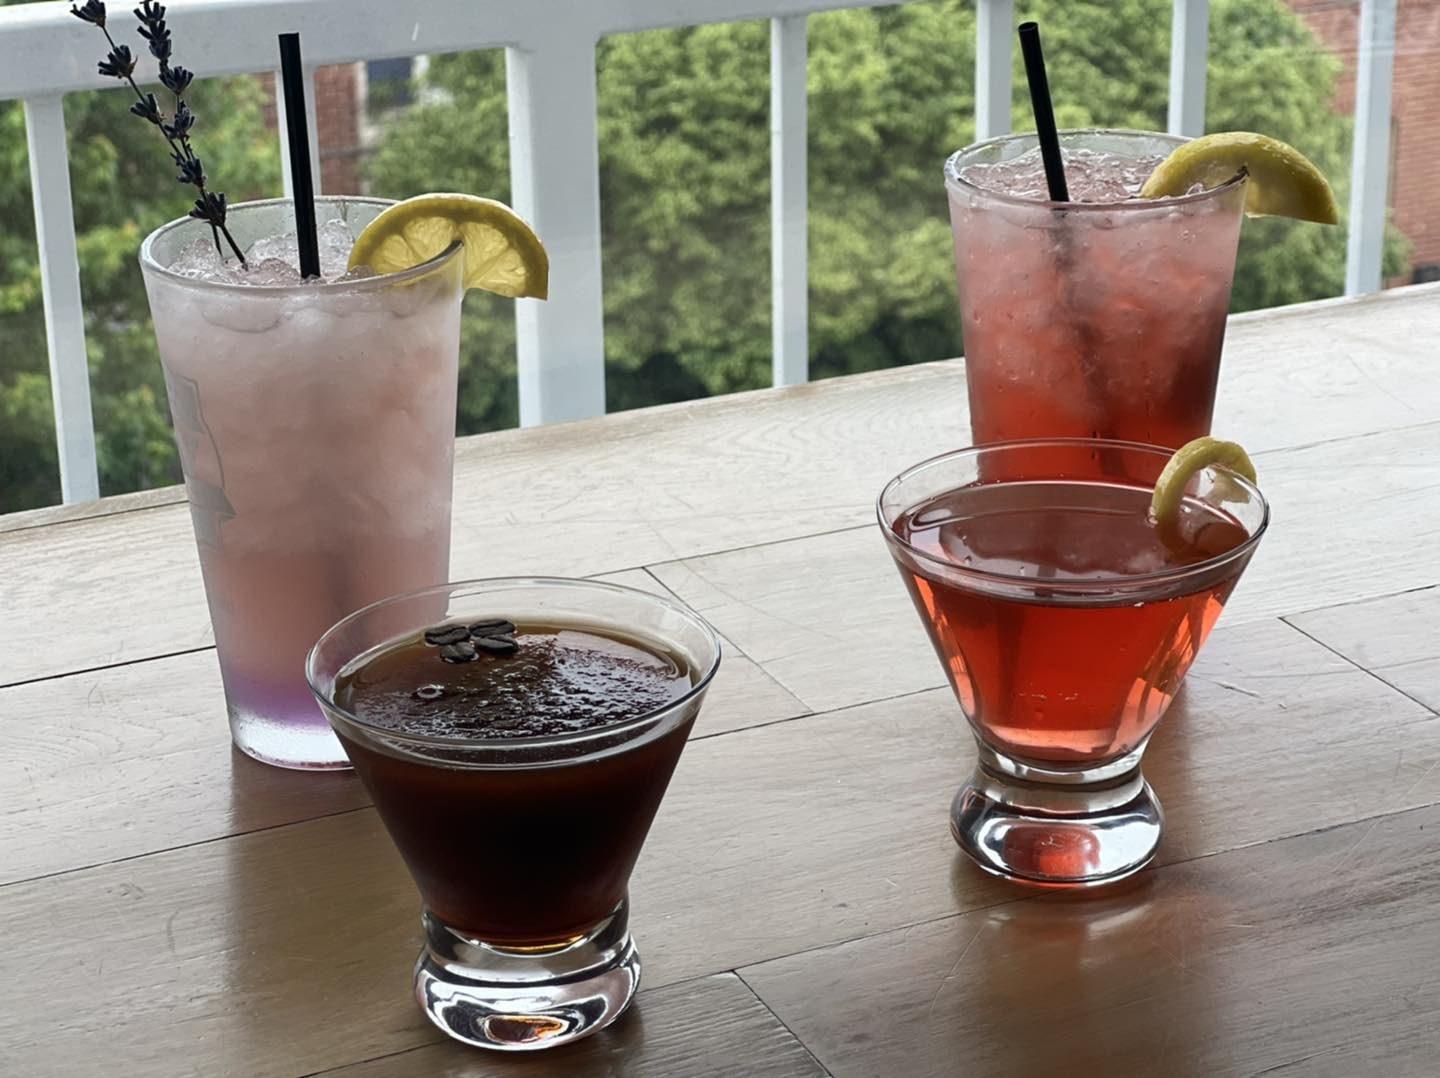 The Chasseur&rsquo;s new Summer Drink menu is live. Try our new summer cocktails including the Frozen Espresso Martini , a Wilde Lavender Crush , or the Chasseur Cosmopolitan served classic style or as a Crush. 
#yummy , #newdrinklist , #wildeirishgi